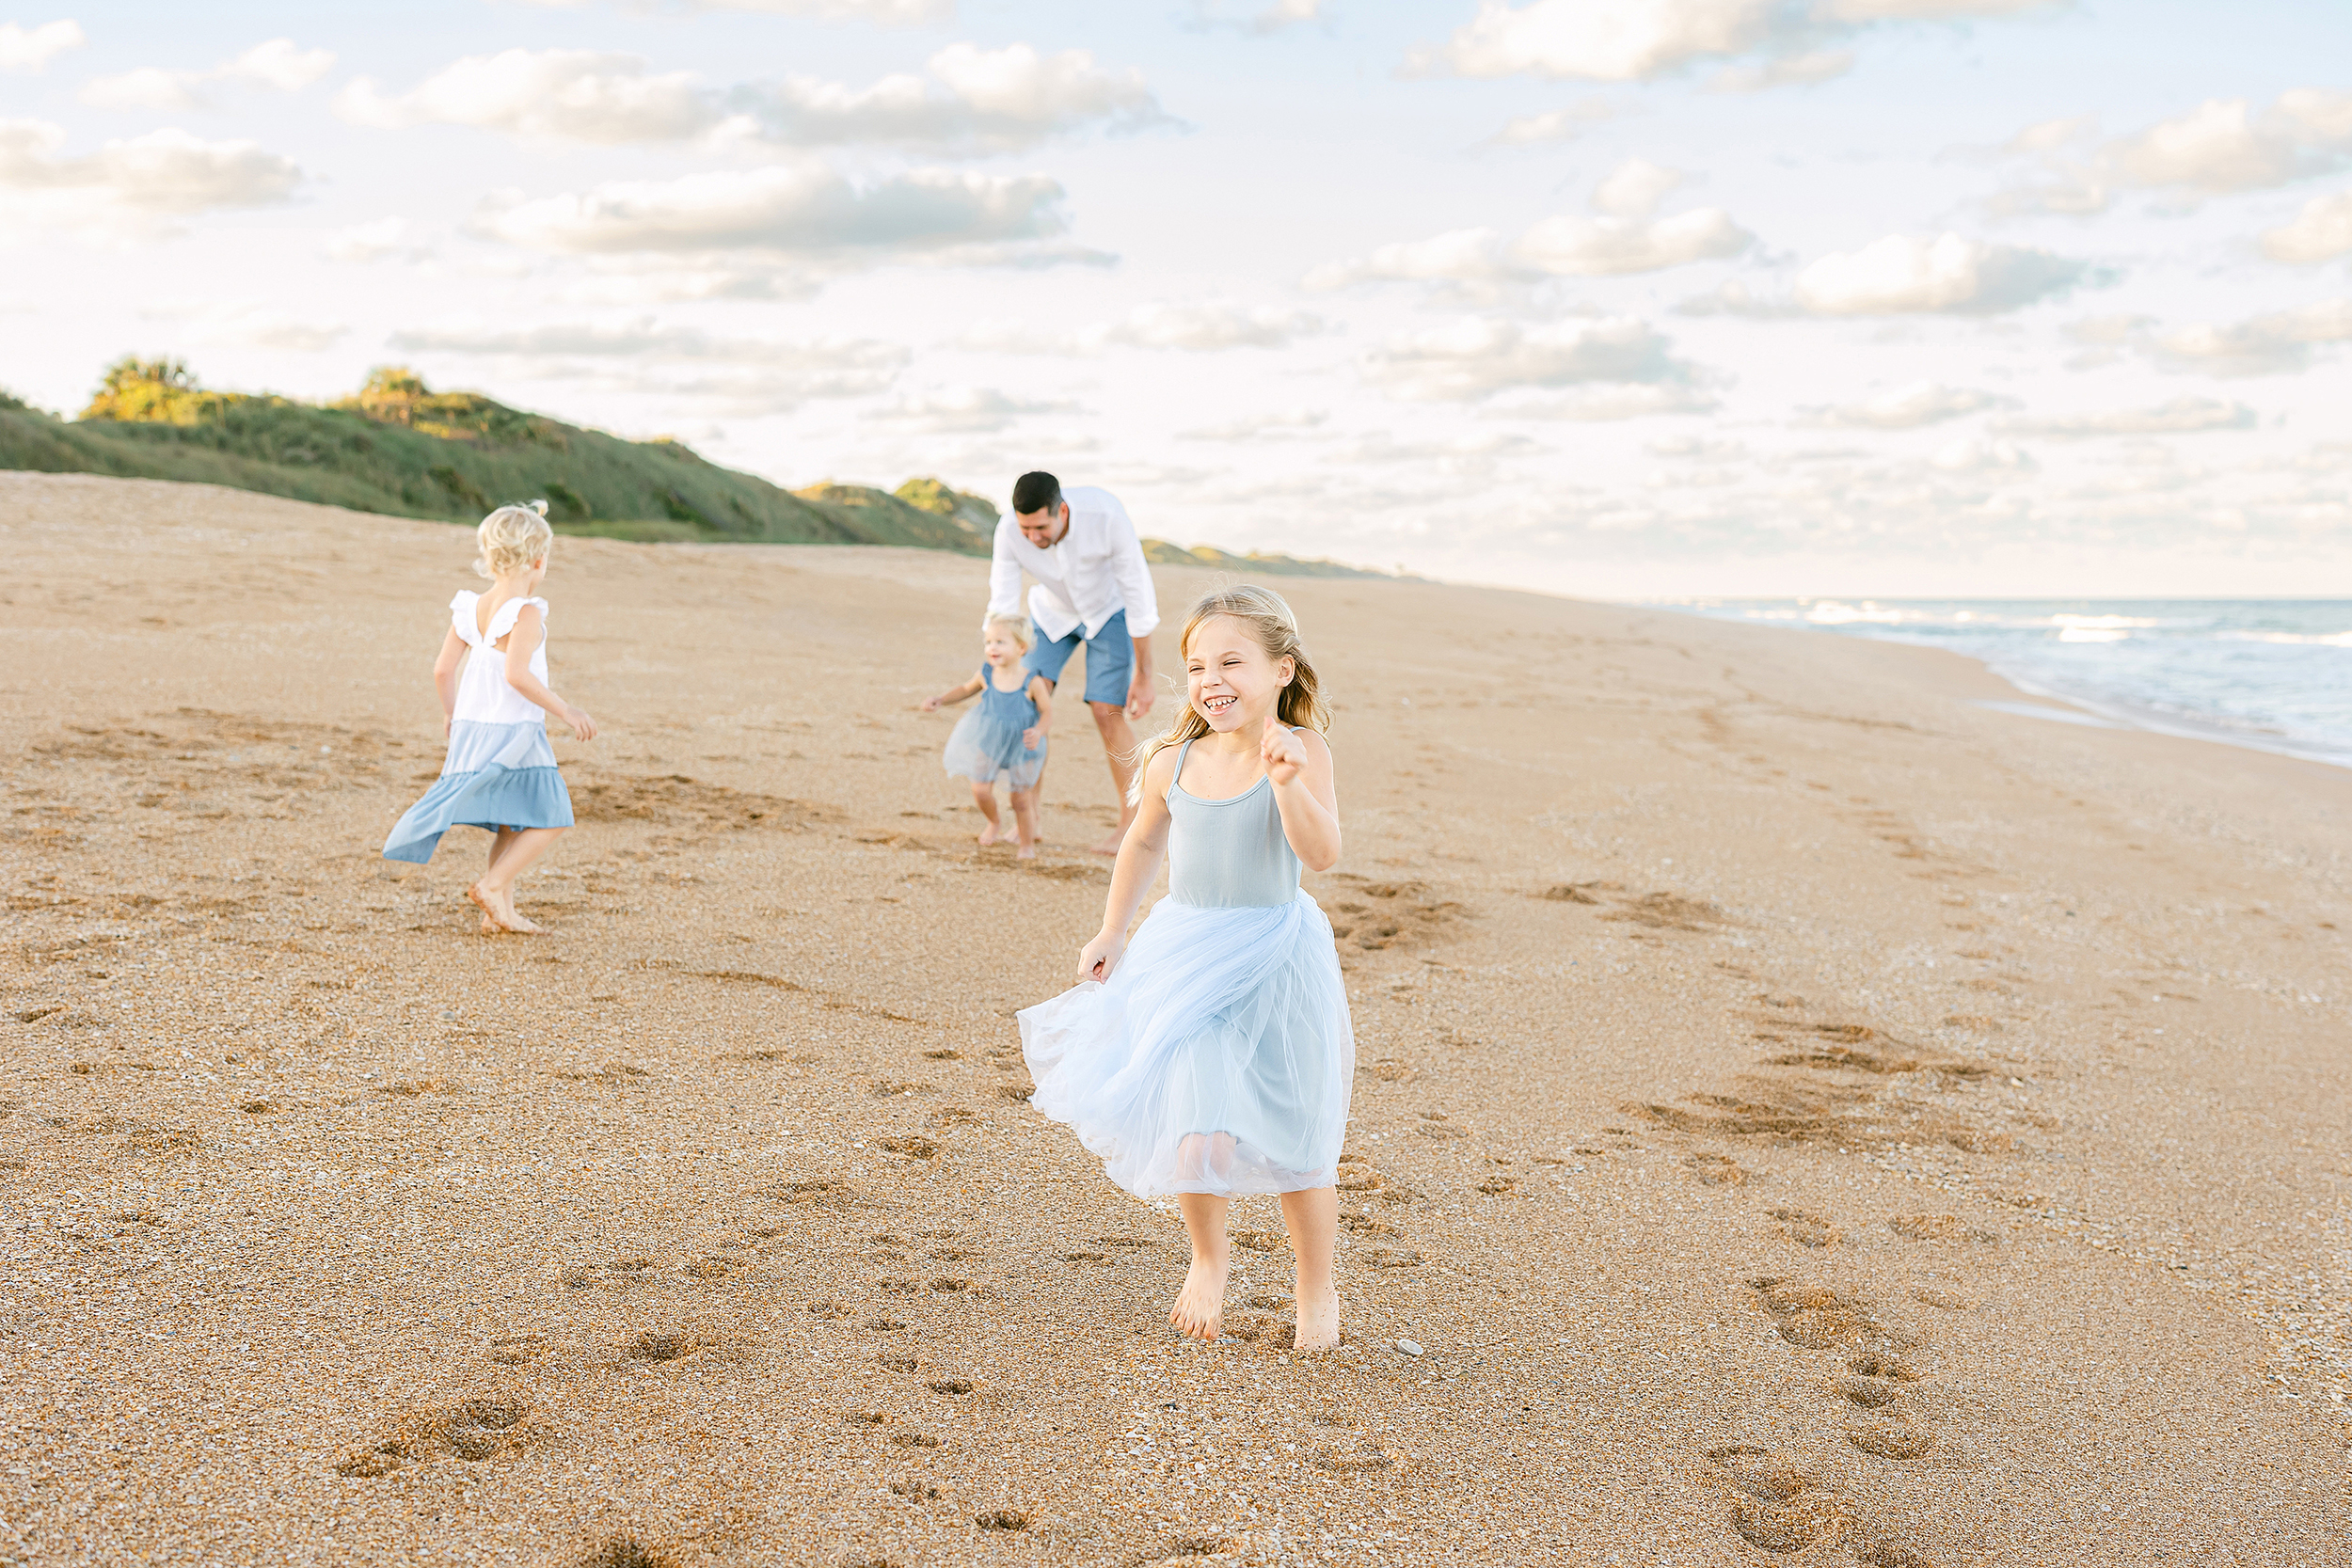 Little girl dressed in a light blue tutu dress chases her family on the beach at sunset.